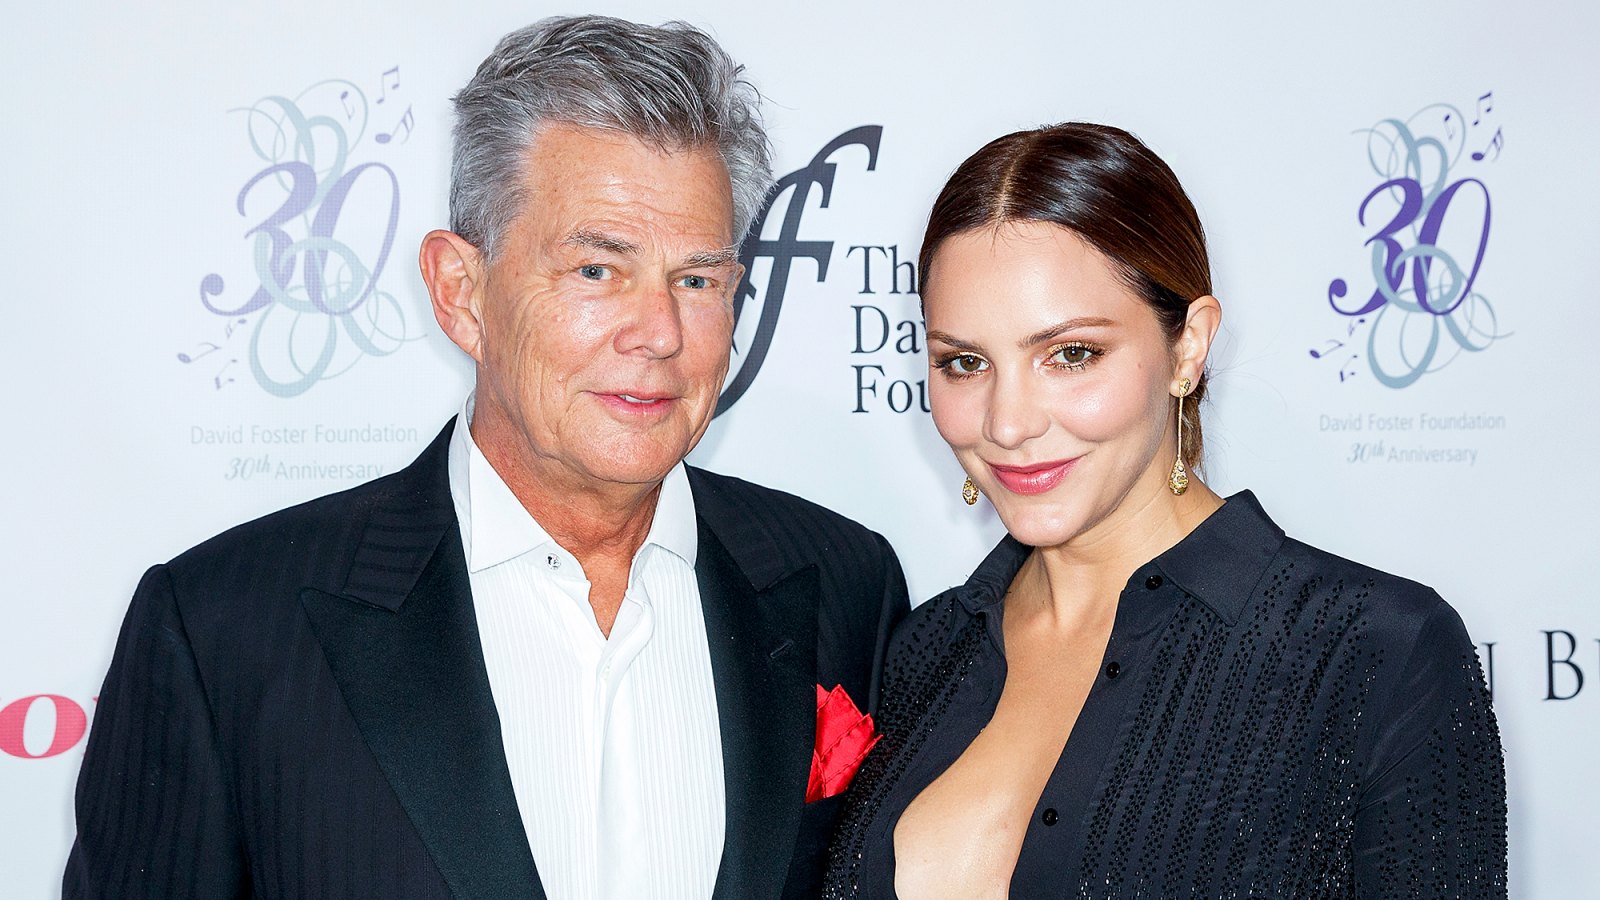 David Foster and Katharine McPhee arrive for the David Foster Foundation Gala at Rogers Arena on October 21, 2017 in Vancouver, Canada.